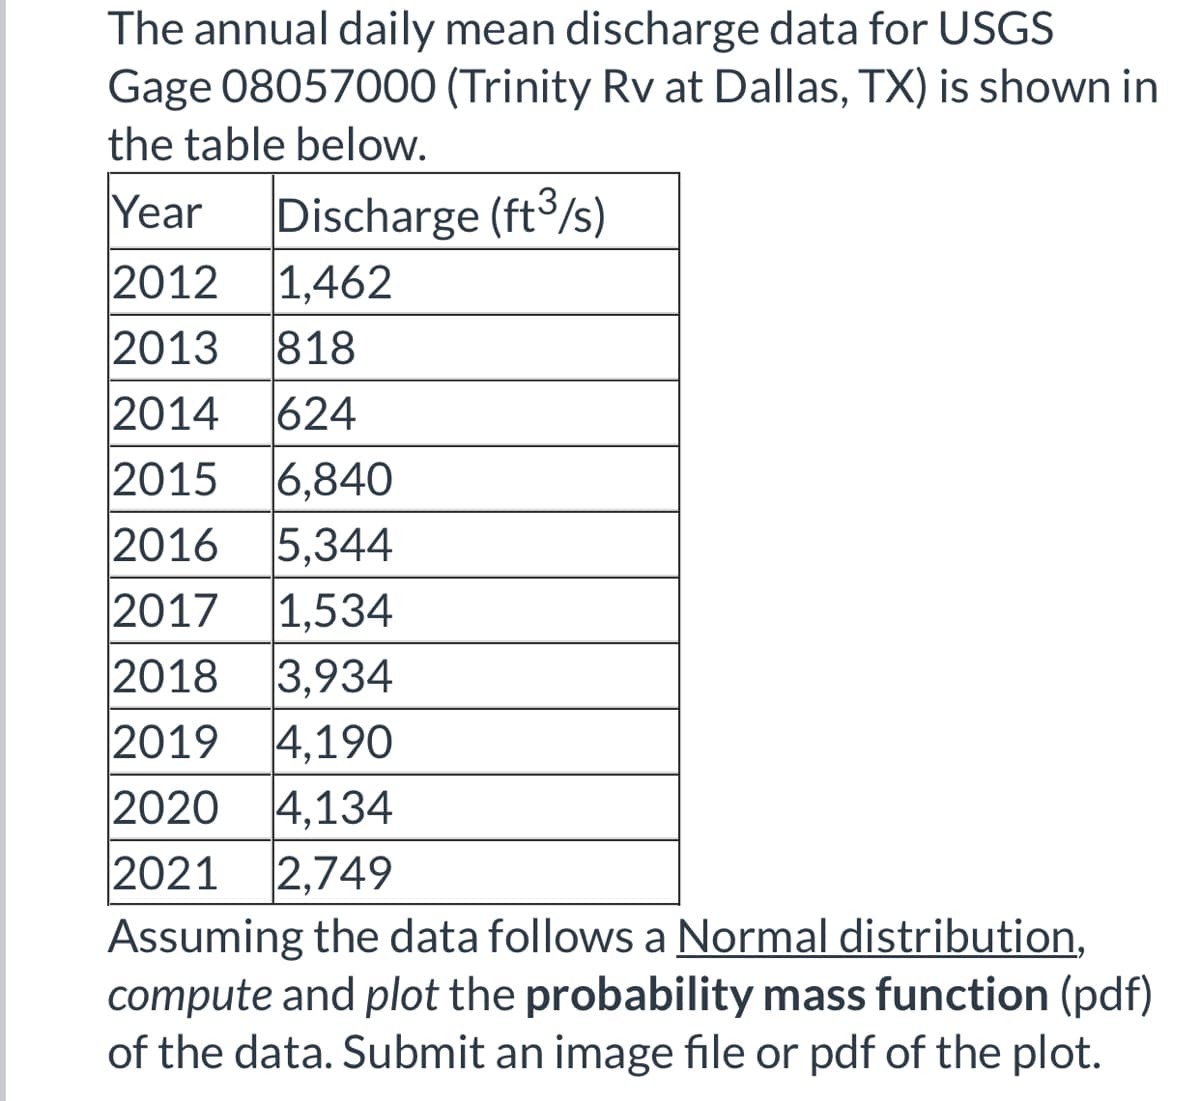 The annual daily mean discharge data for USGS
Gage 08057000 (Trinity Rv at Dallas, TX) is shown in
the table below.
Year Discharge (ft3/s)
2012 1,462
2013 818
2014 624
2015 6,840
2016 5,344
2017 1,534
2018 3.934
2019 4,190
2020 4,134
2021 2,749
Assuming the data follows a Normal distribution,
compute and plot the probability mass function (pdf)
of the data. Submit an image file or pdf of the plot.